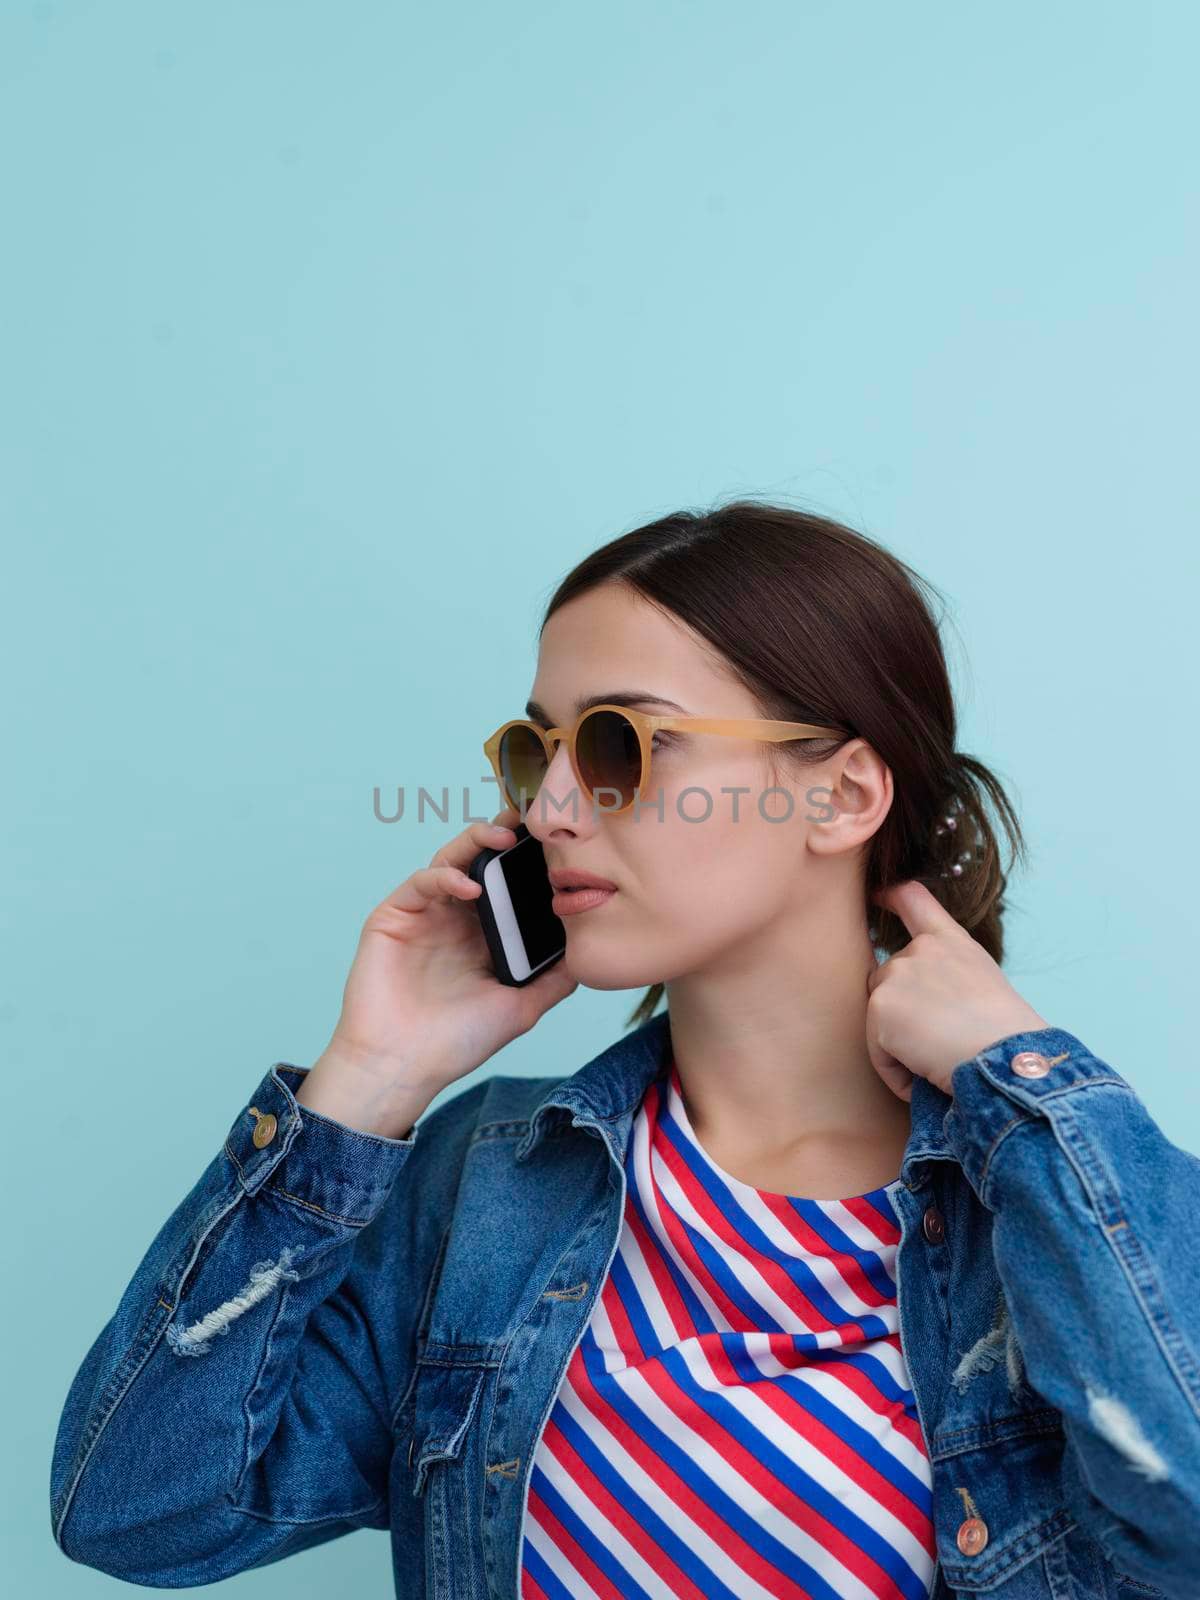 Portrait of young girl talking on the phone while standing in front of blue background. Female model wearing sunglasses representing modern fashion and technology concept